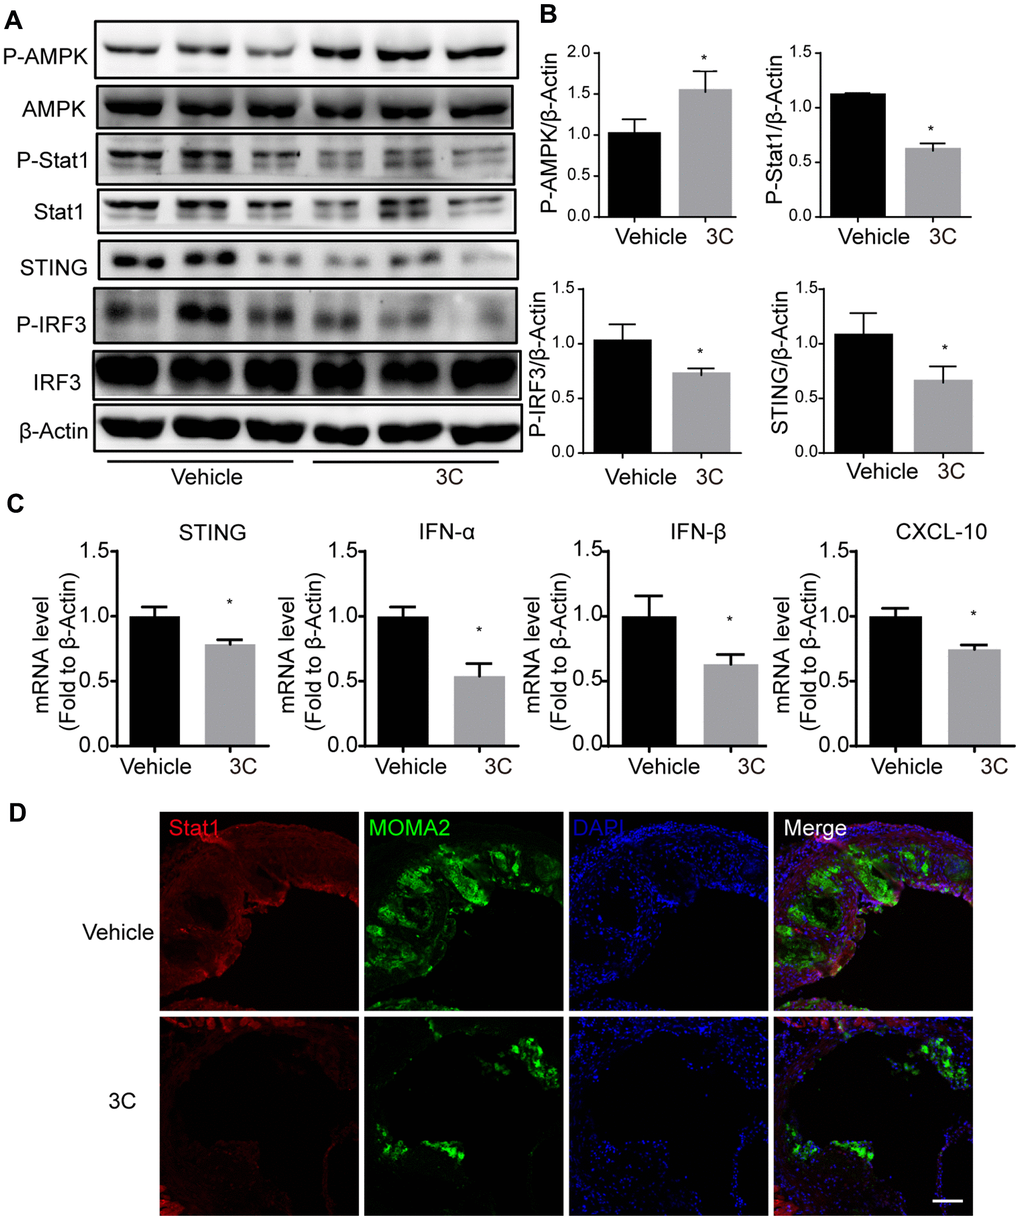 Treatment of ApoE-/- mice with 3C inhibits JAK-STAT1 and downstream signaling. (A) Relative level of P-Stat1; Stat1; P-AMPK; AMPK; STING; P-IRF3 and IRF3 was assessed by Western Blot (n=3 per group). (B) Quantitative results for the relative expression level of P-Stat1; P-AMPK; STING and P-IRF3normalized to β-Actin (n=3 per group). (C) Fold change of STING, IFN-α, IFN-β, and CXCL10 mRNA expression level from aortas of different groups. (D) Representative images of immunofluorescence staining for Stat1 from the aortic root of ApoE-/- mice treated with vehicle or 3C. All data were assessed using Student’s t-test and are present as mean±SEM. *P